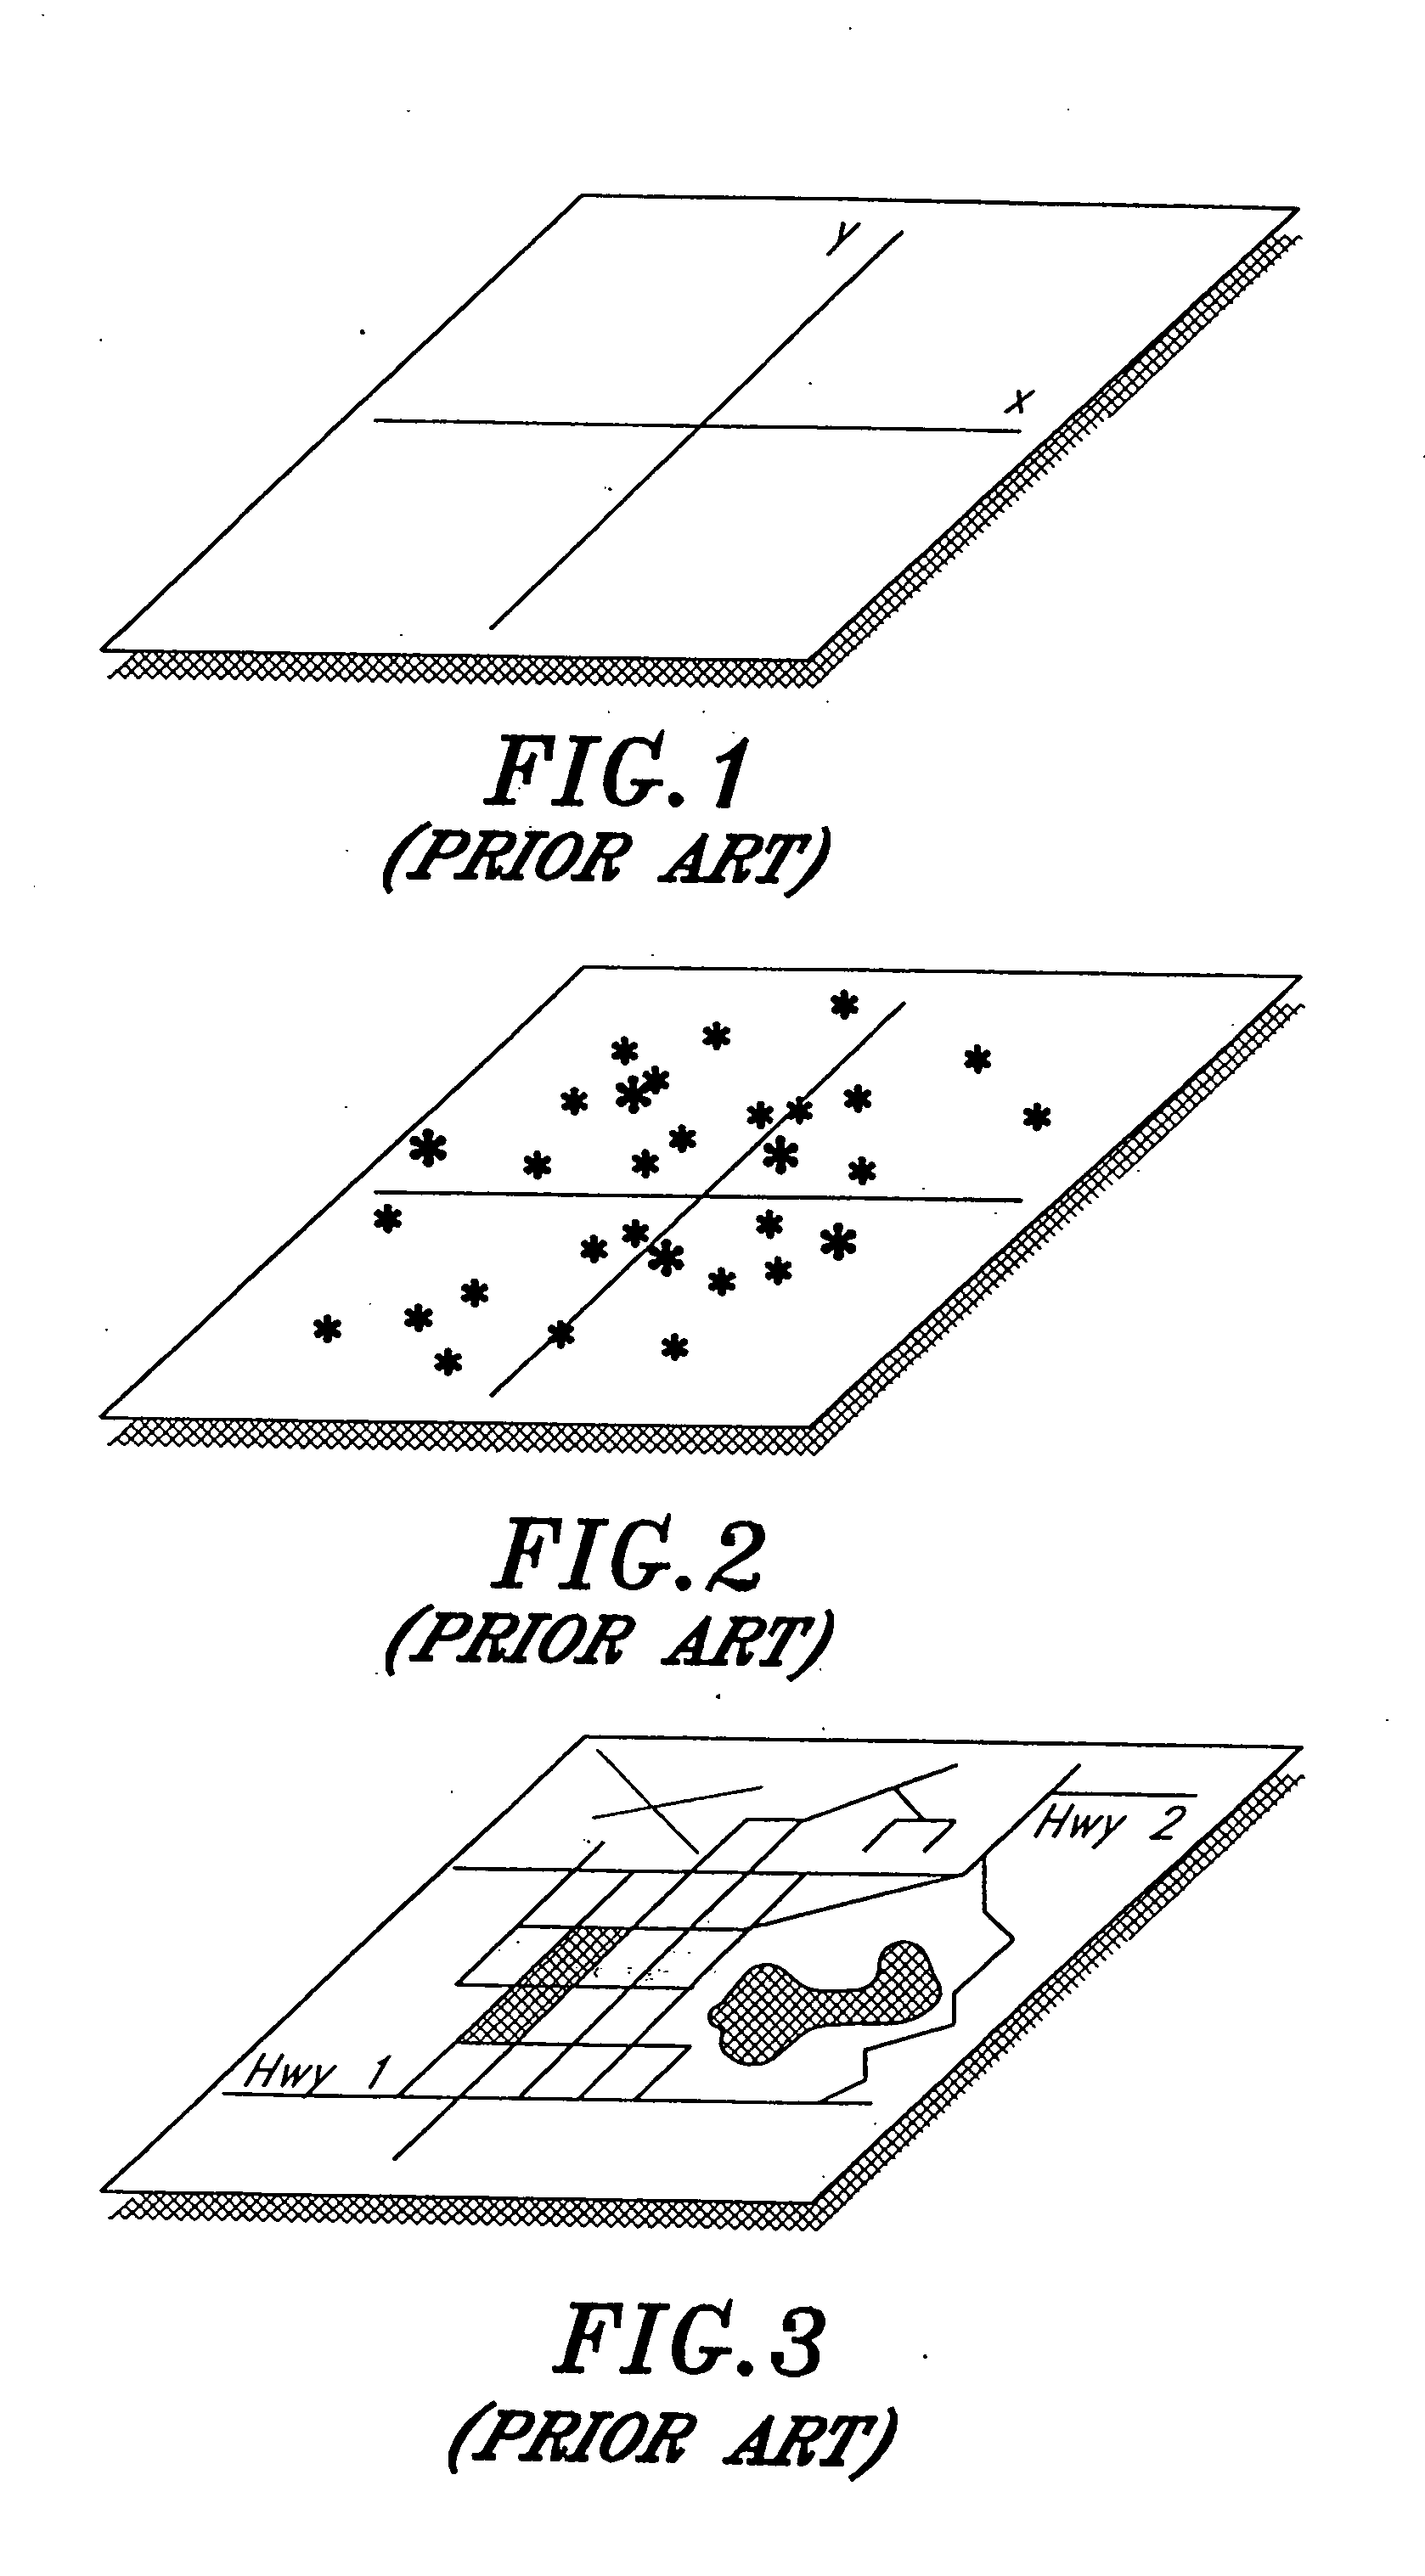 System and method of optimizing database queries in two or more dimensions